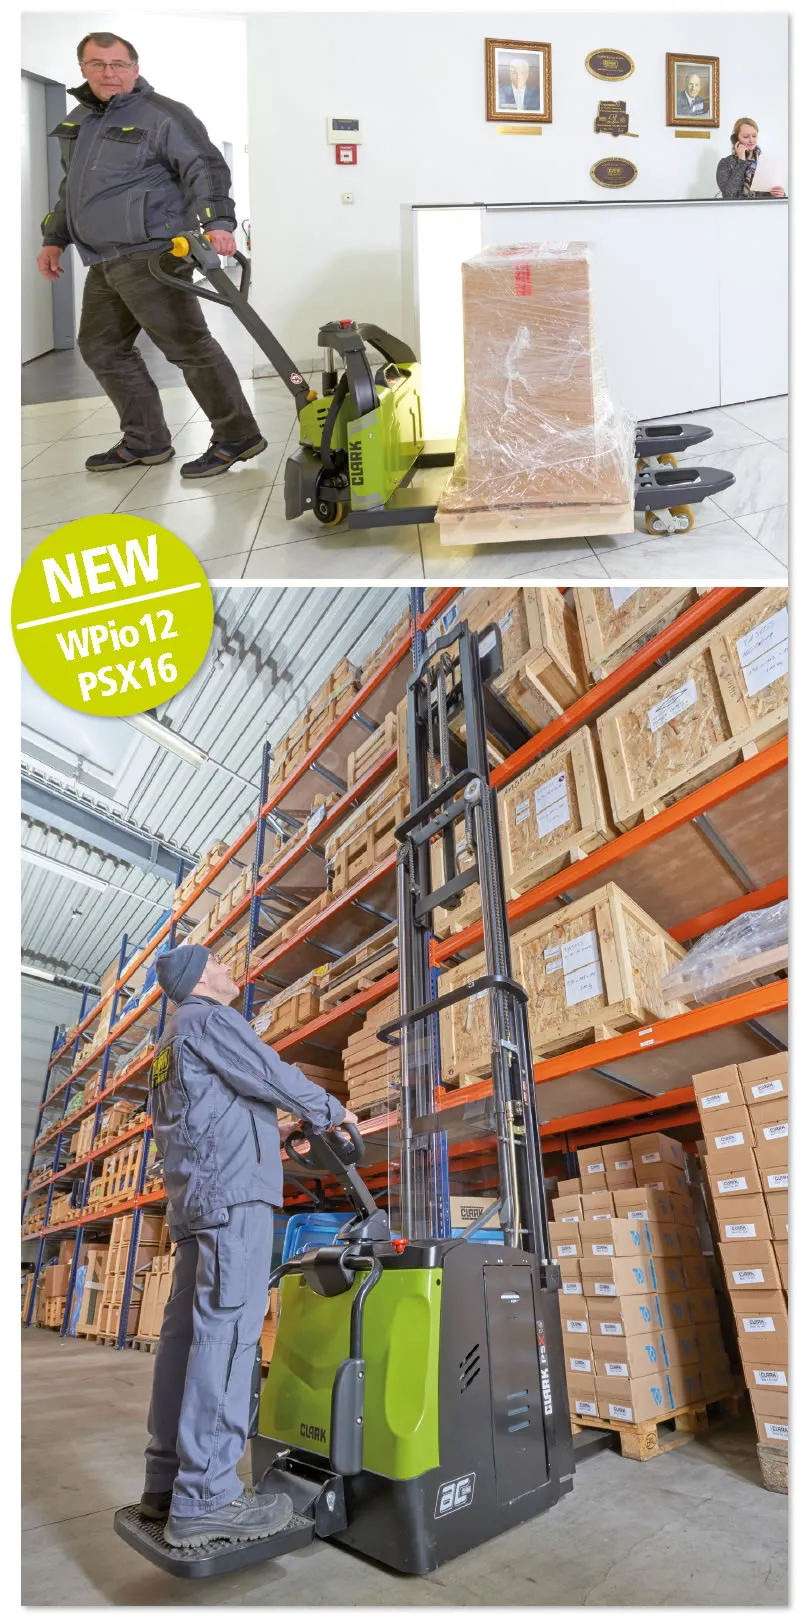 New warehouse equipment: WPio12 electric hand pallet truck and PSX16 electric stacker